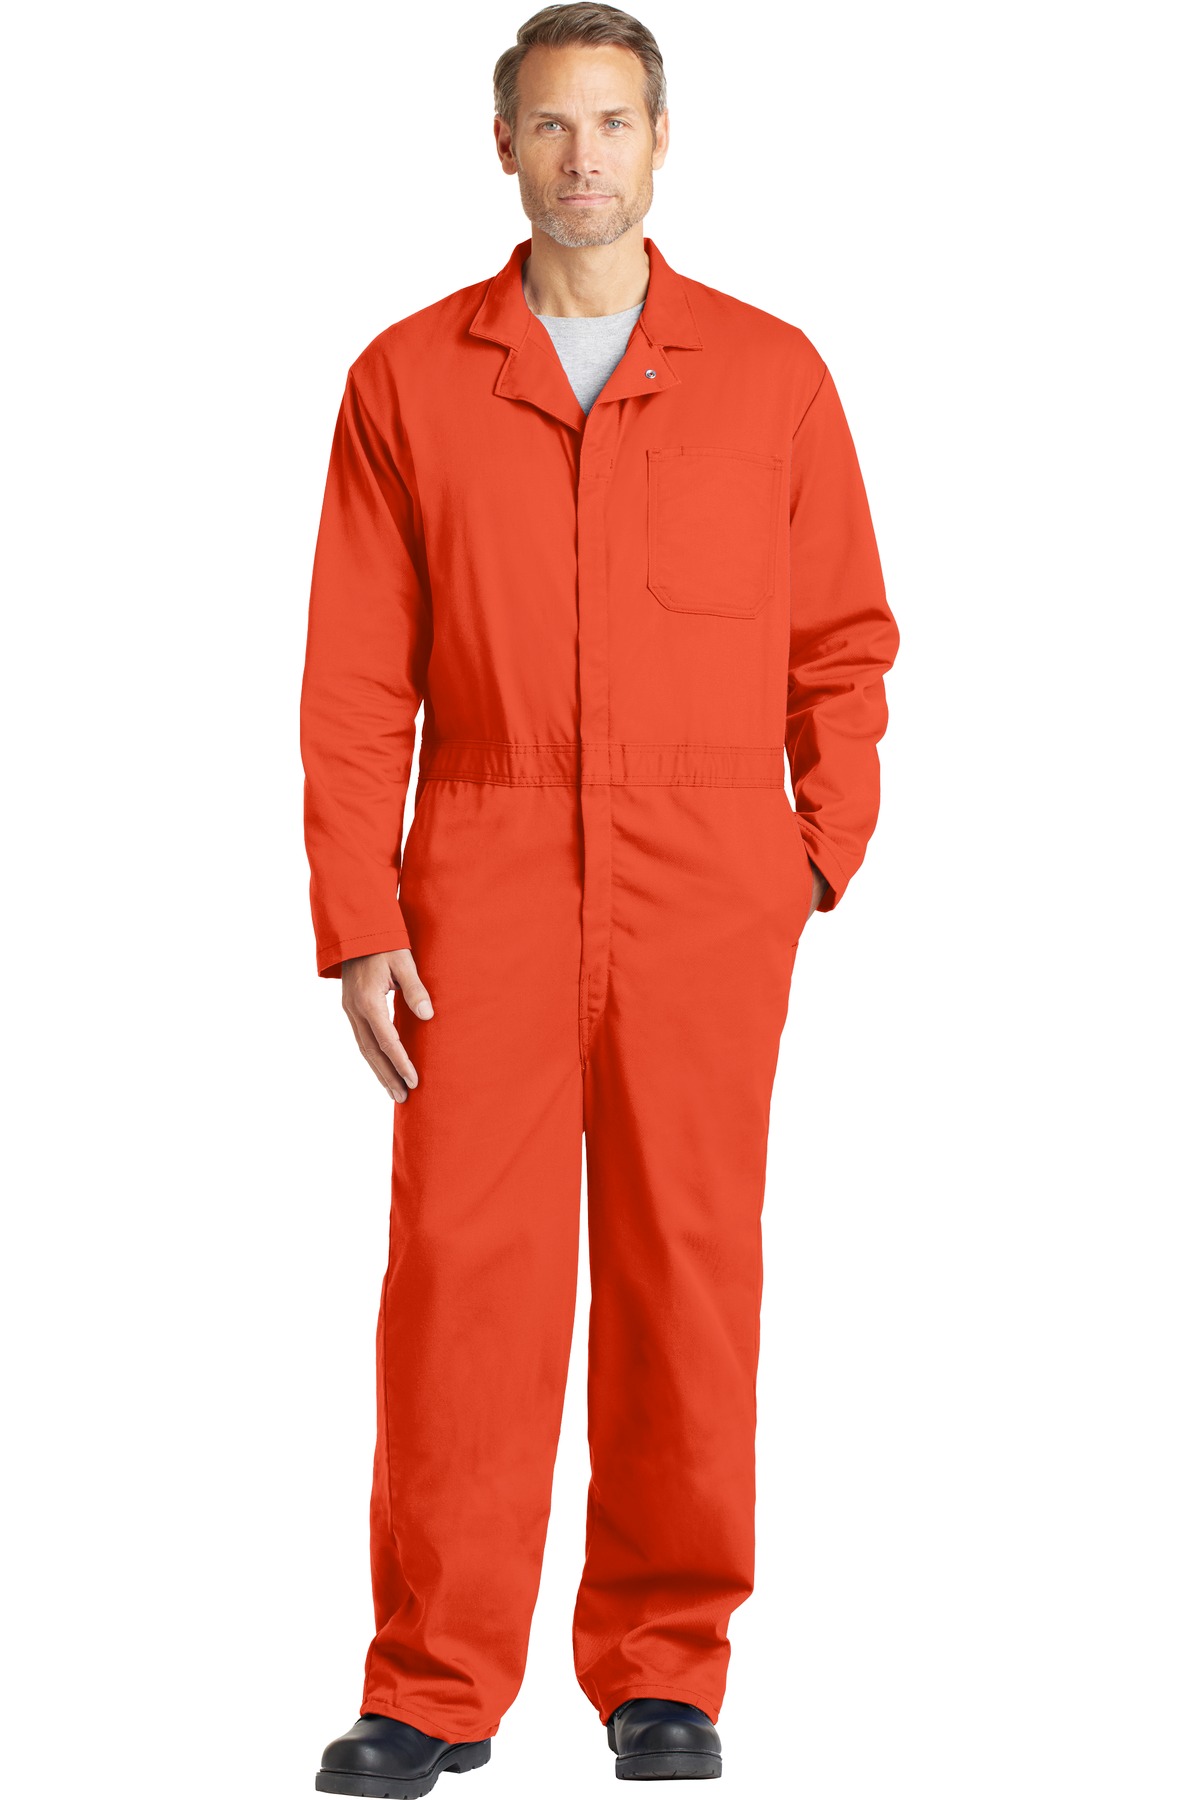 Bulwark  EXCEL FR  CEC2LONG - Tall Classic Coverall